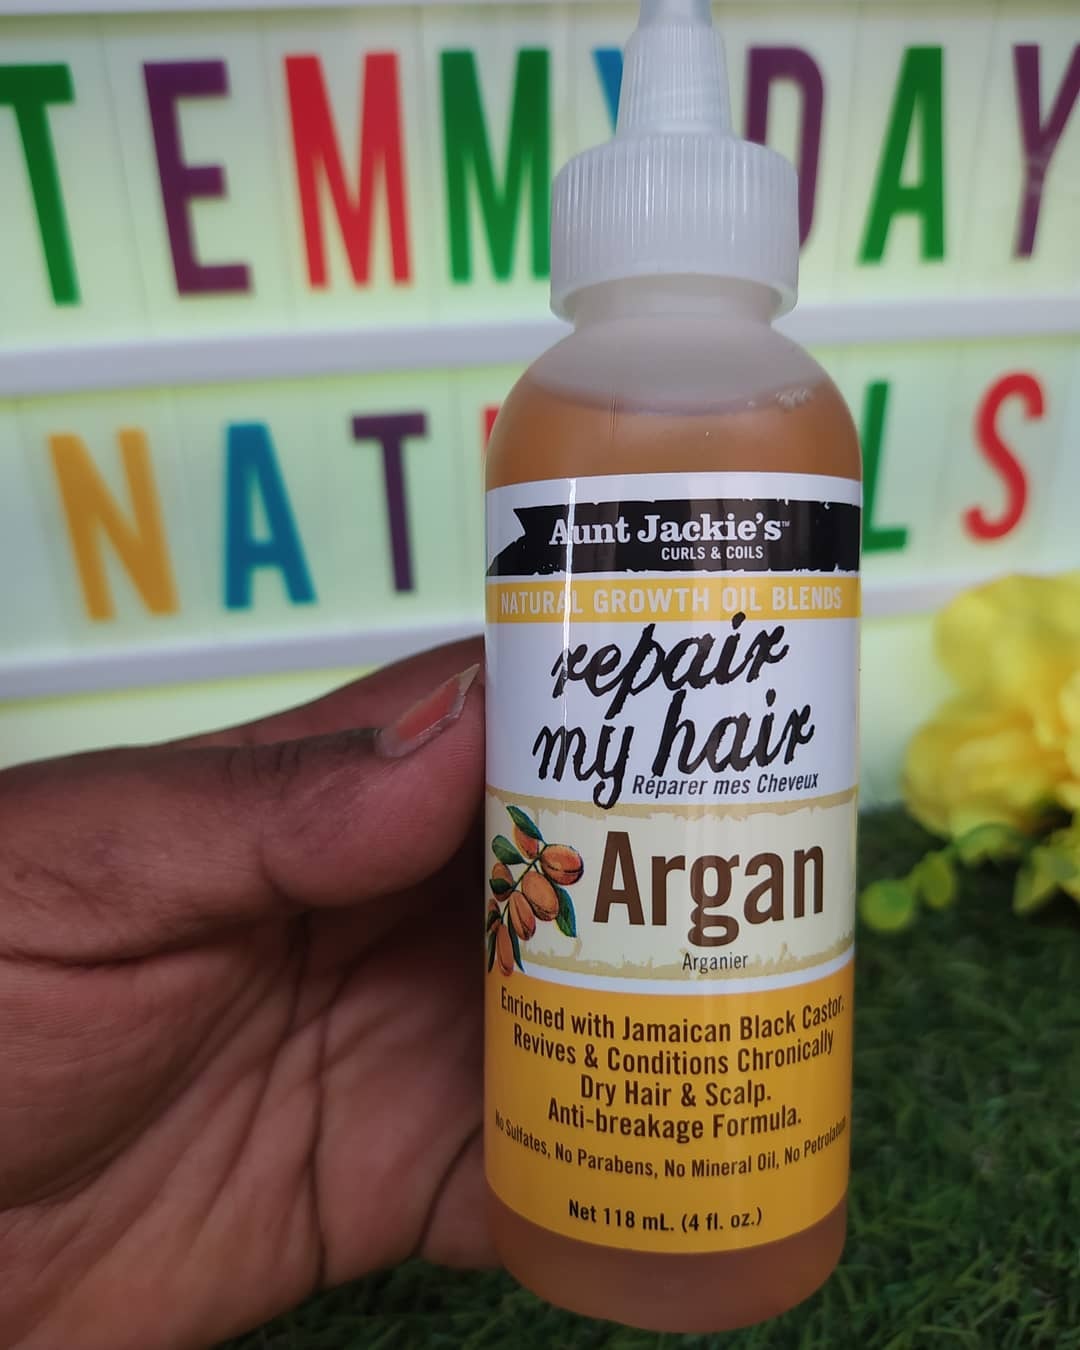 Aunt Jackie's Natural hair growth oil for 4c hair